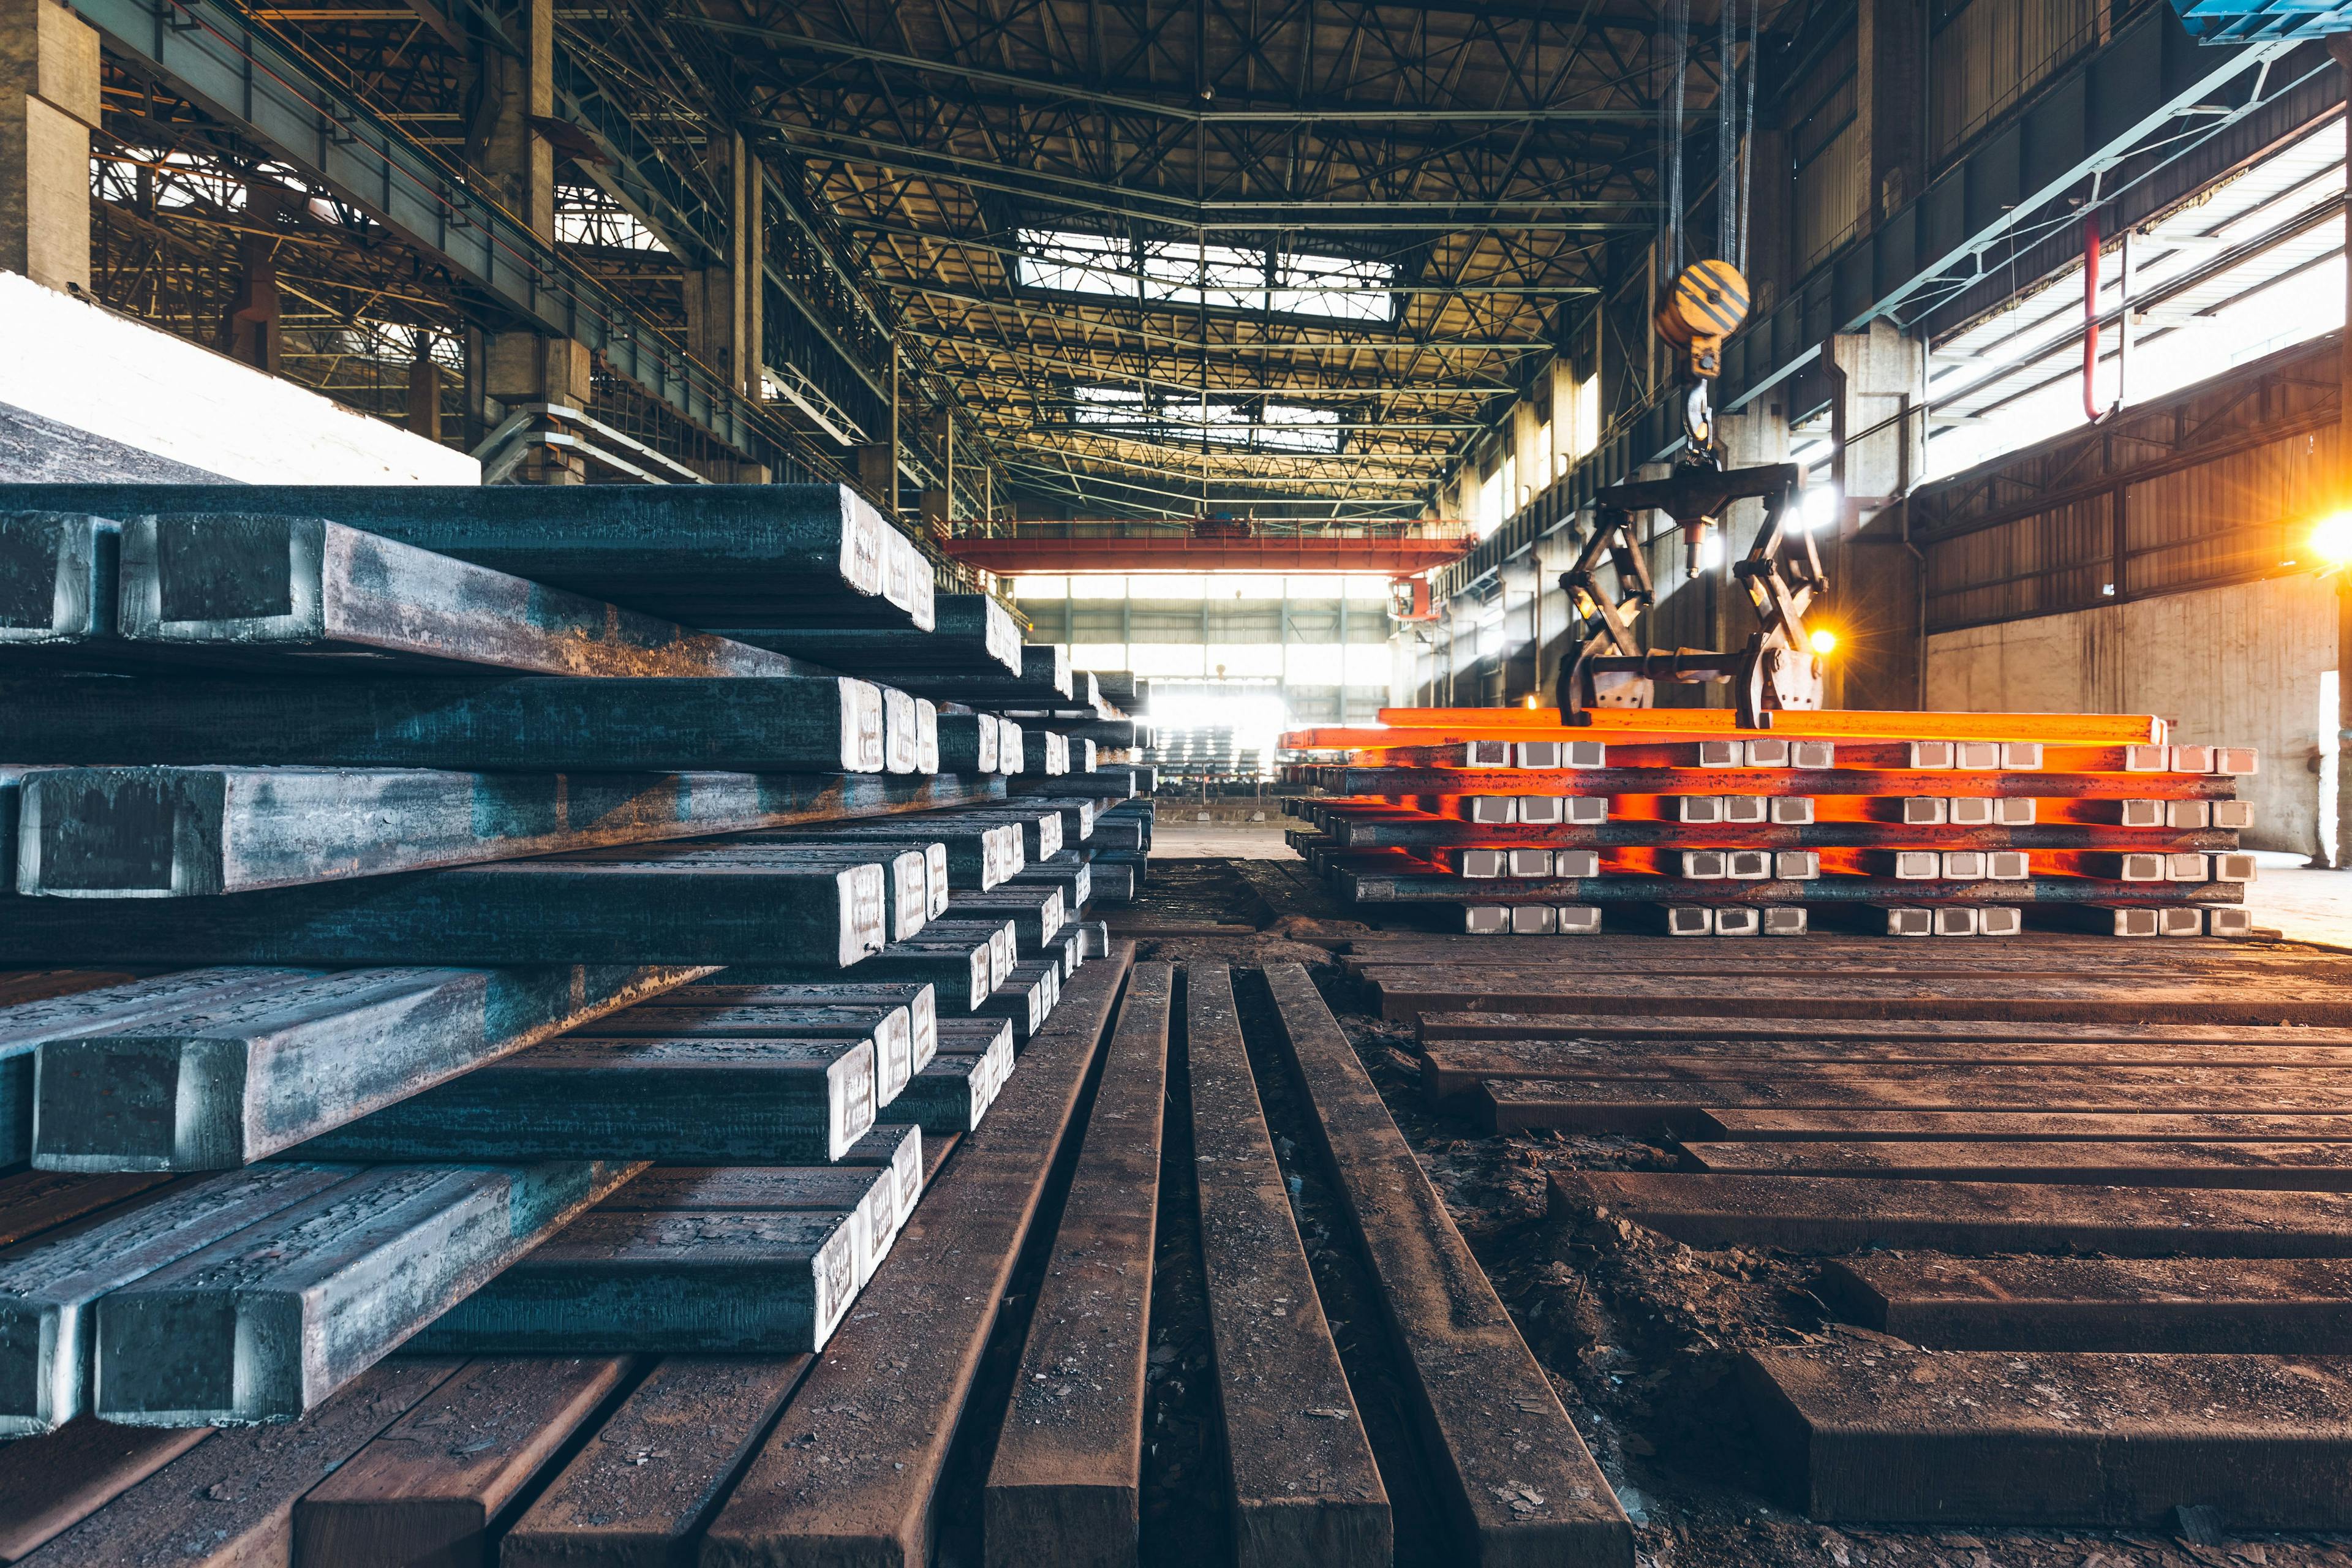 interior view of a steel factory,steel industry in city of China. | Image Credit: © fanjianhua - stock.adobe.com